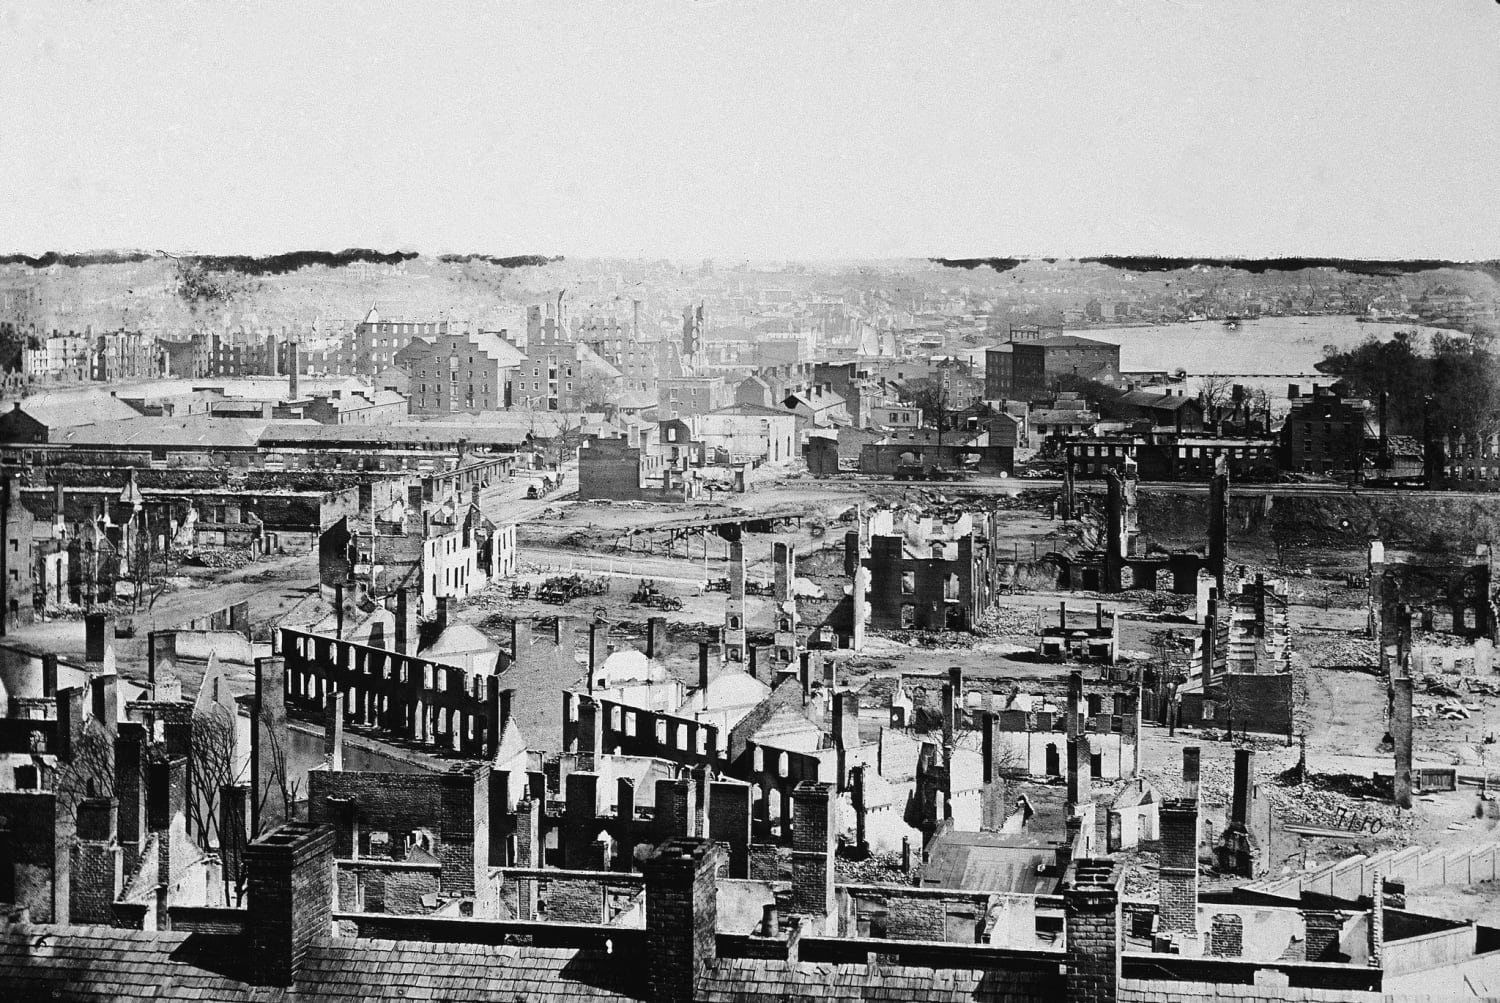 Aerial view of the ruins of the city of Richmond after General Sherman's "March to the Sea" campaign which began in Atlanta on November 15, 1864, and ended in Savannah on December 21, 1864.